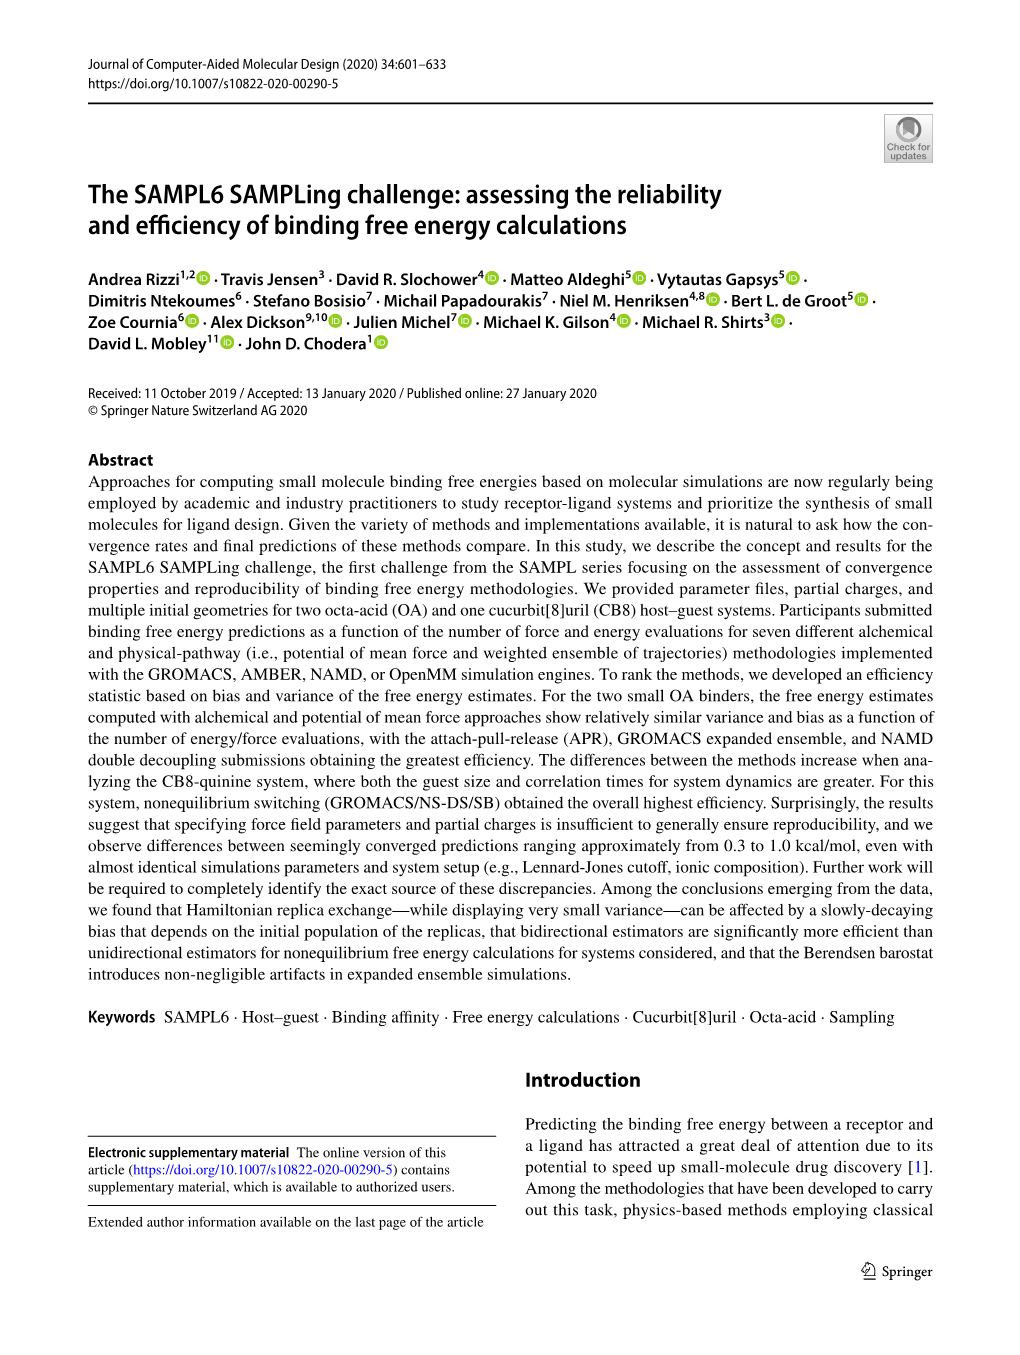 The SAMPL6 Sampling Challenge: Assessing the Reliability and Efciency of Binding Free Energy Calculations